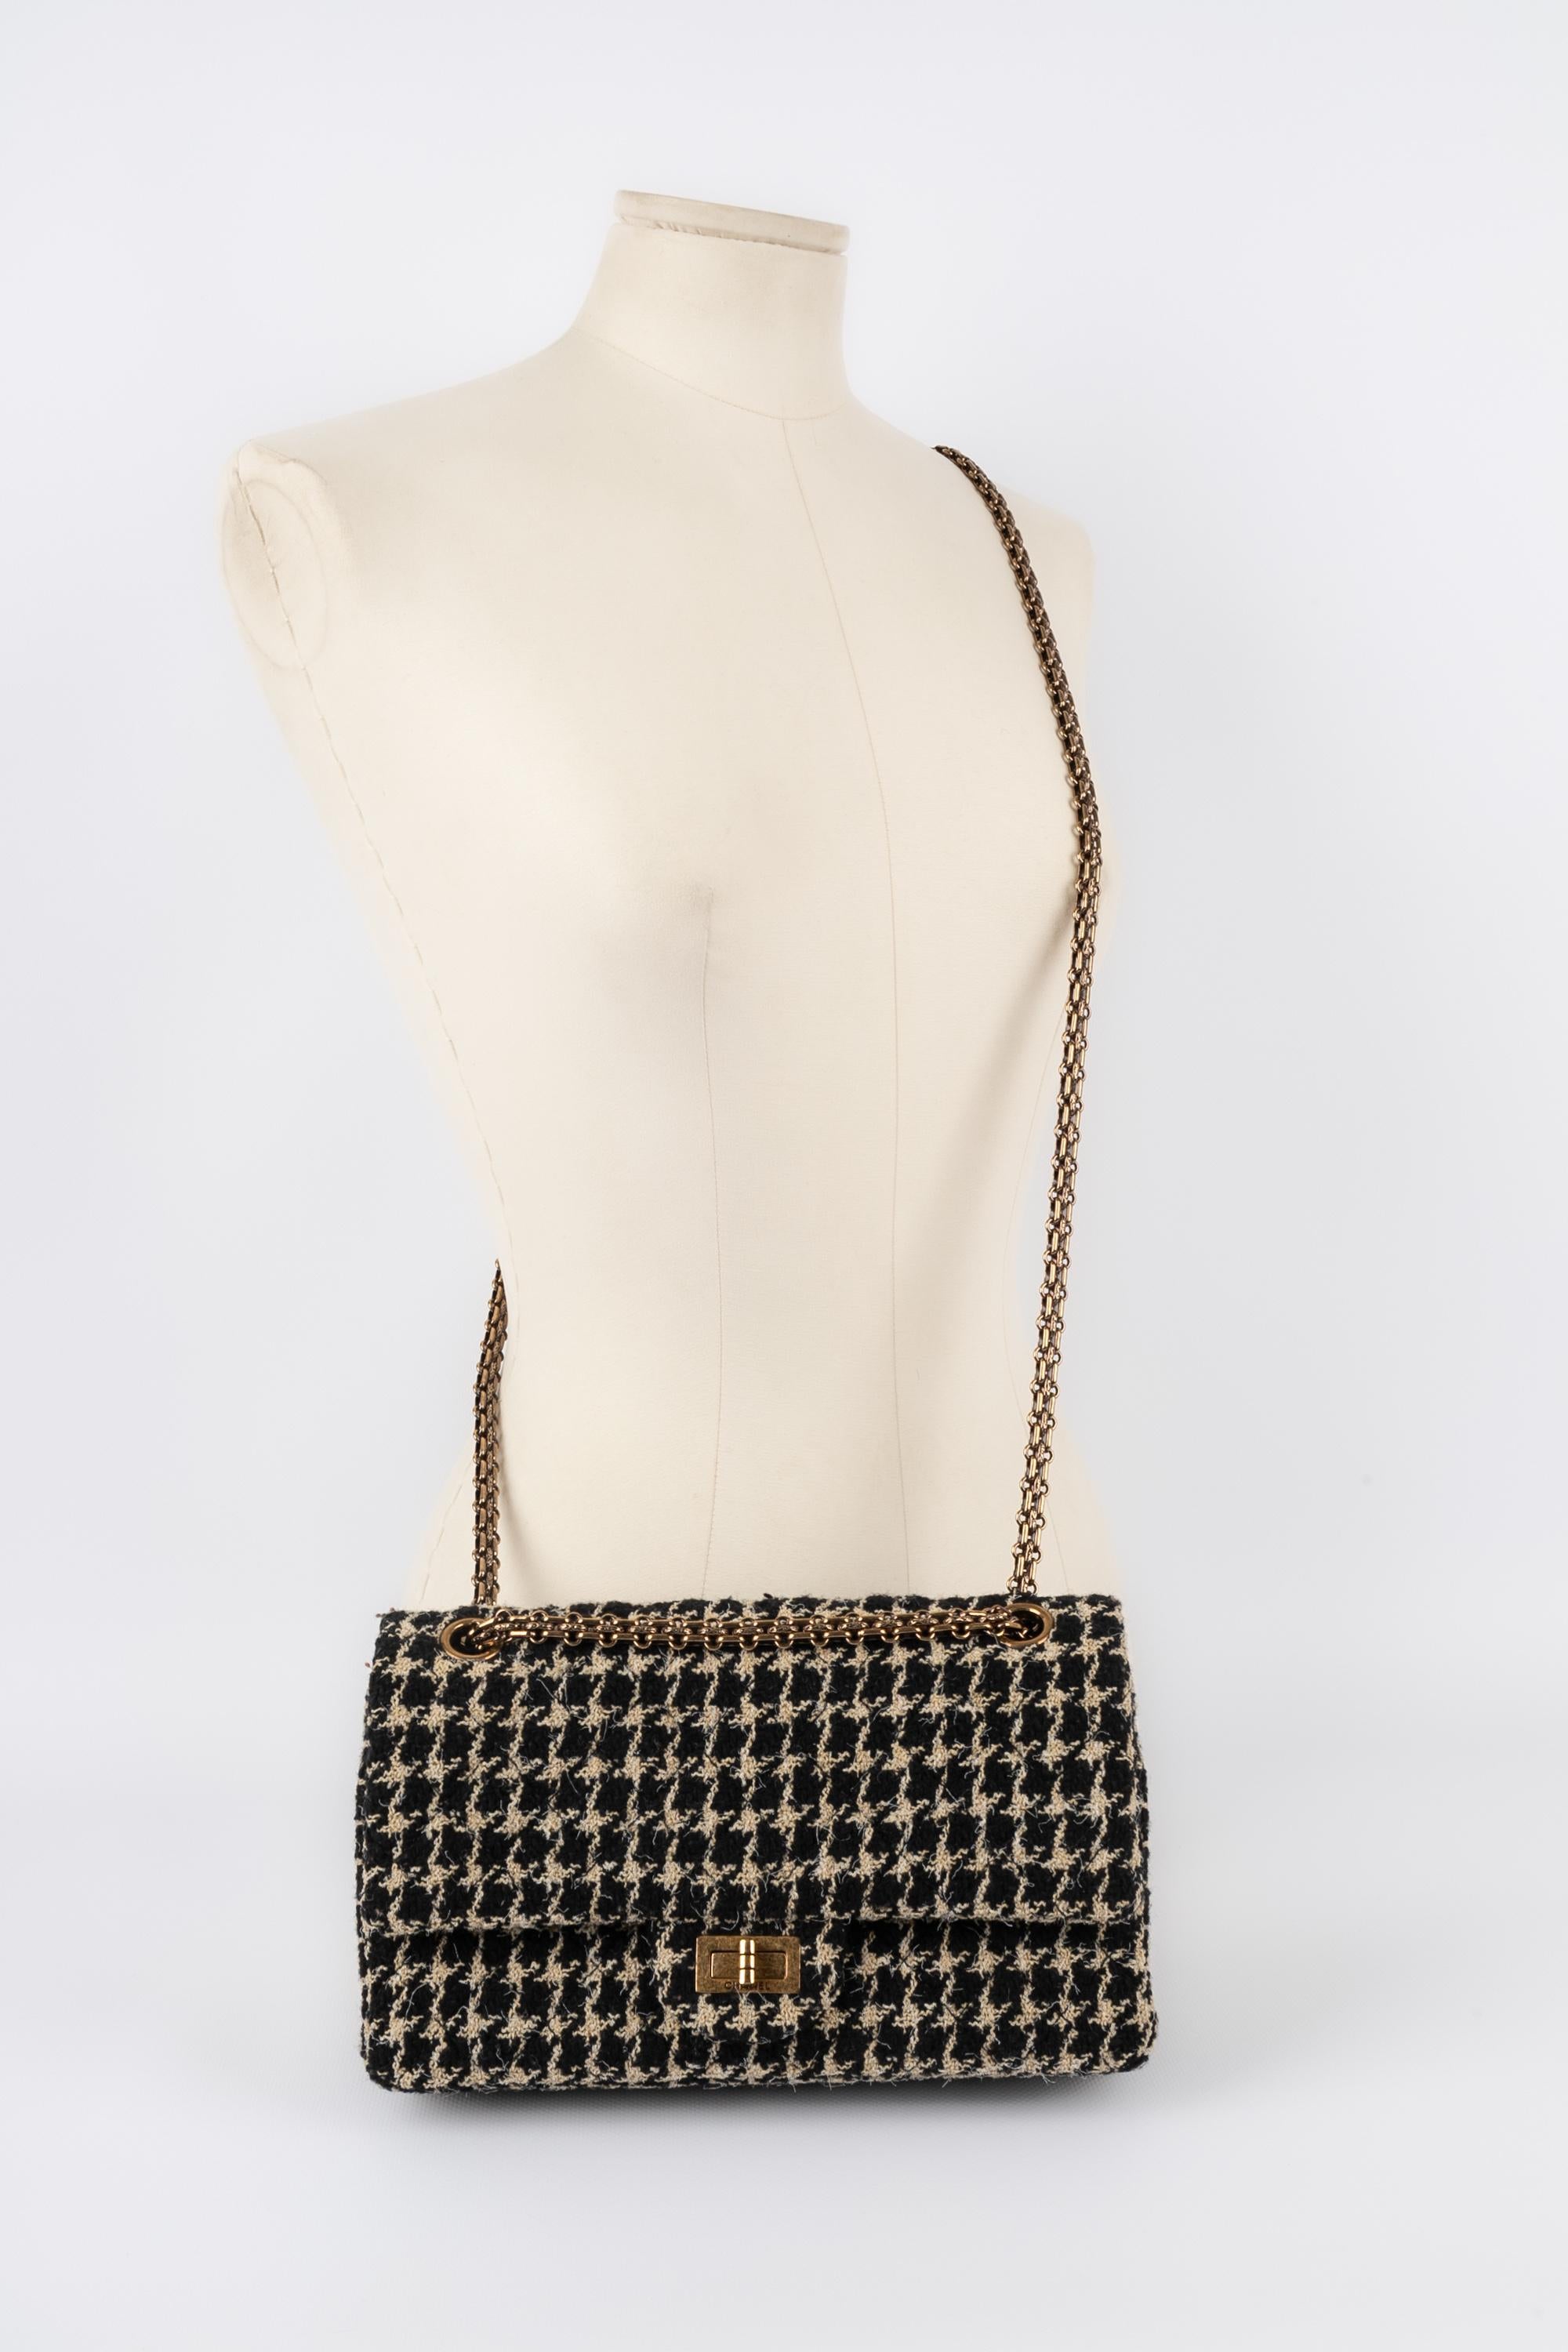 CHANEL - (Made in Italy) Tweed 2.55 bag with houndstooth patterns and golden metal elements. Sold with a serial number. 2015/2016 Collection.

Condition:
Good condition

Dimensions:
Length: 24 cm - Height: 15 cm - Depth: 8 cm - Handle: 105 cm

S3